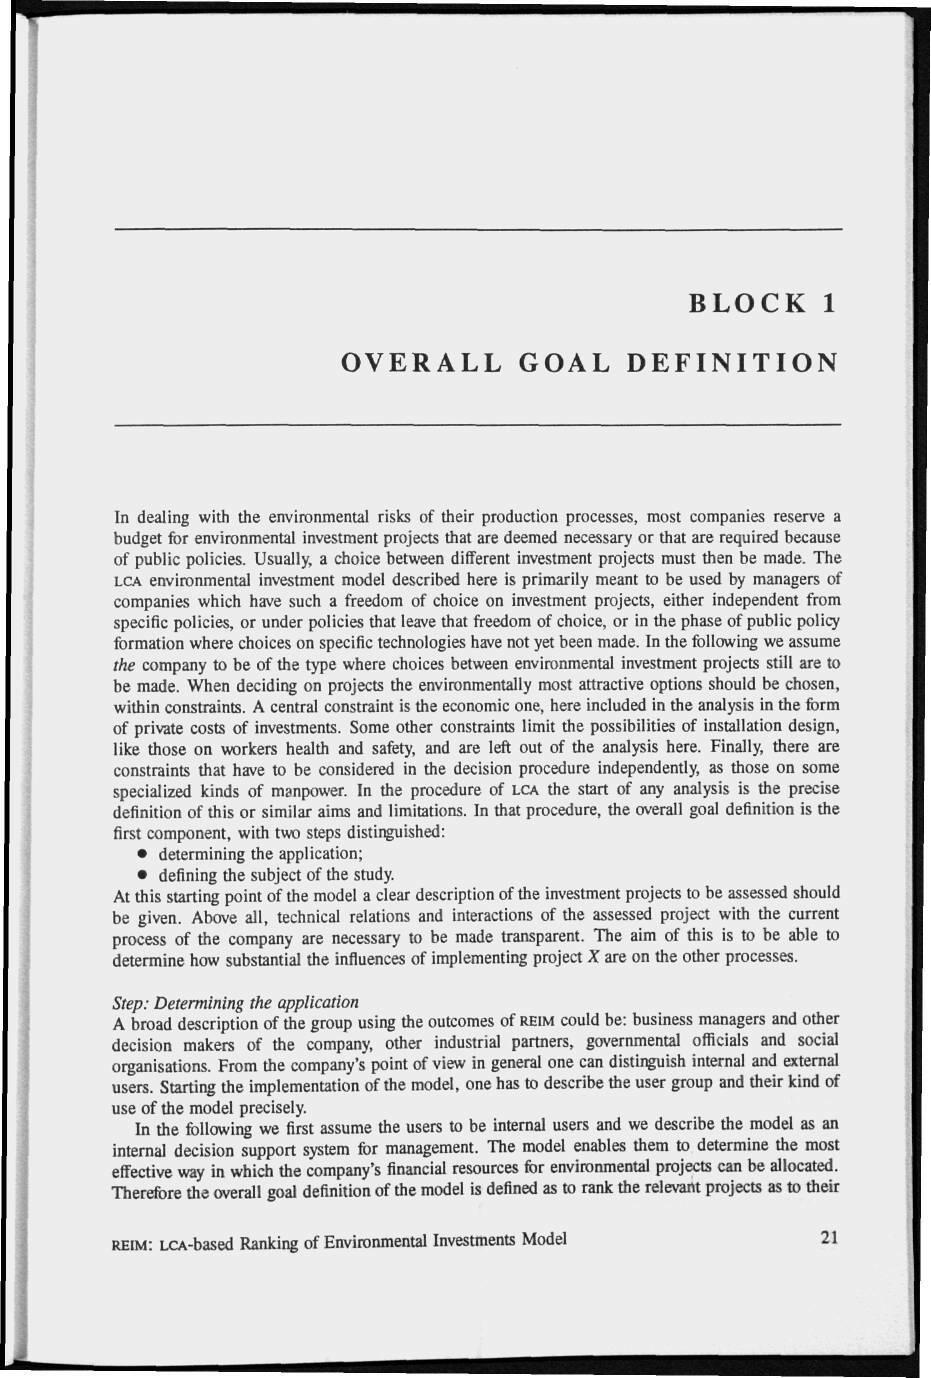 BLOCK l OVERALL GOAL DEFINITION In dealing with the environmental risks of their production processes, most companies reserve a budget for environmental investment projects that are deemed necessary